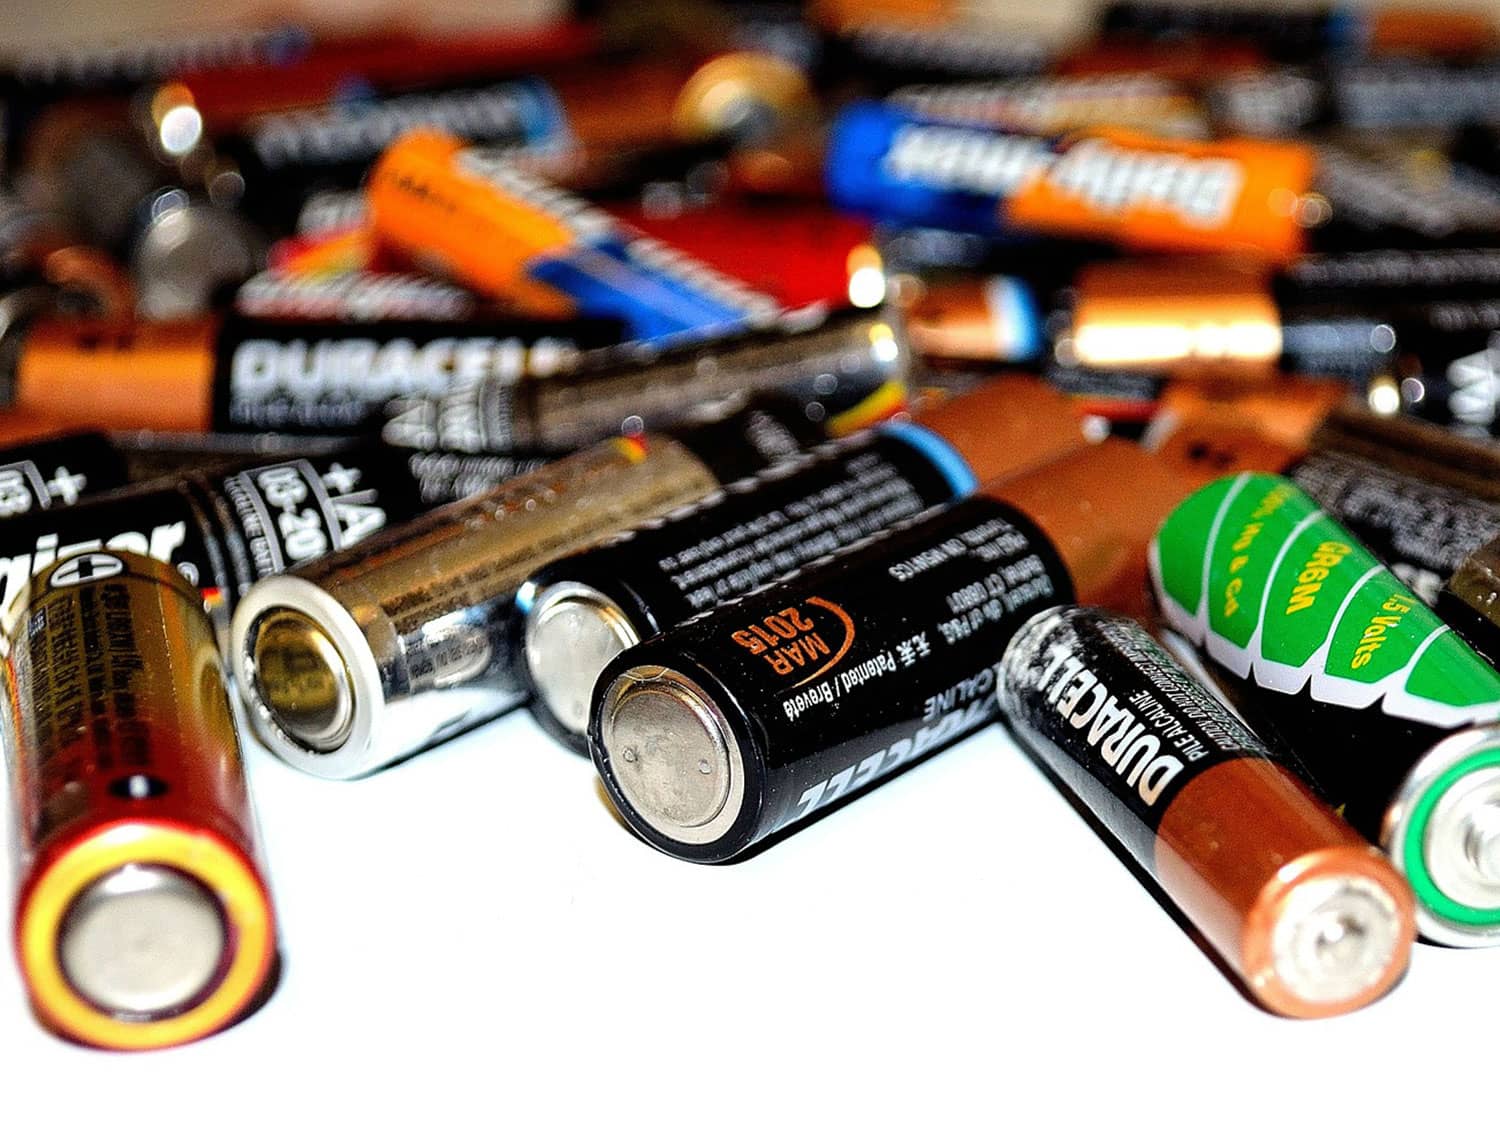 A pile of batteries in different sizes